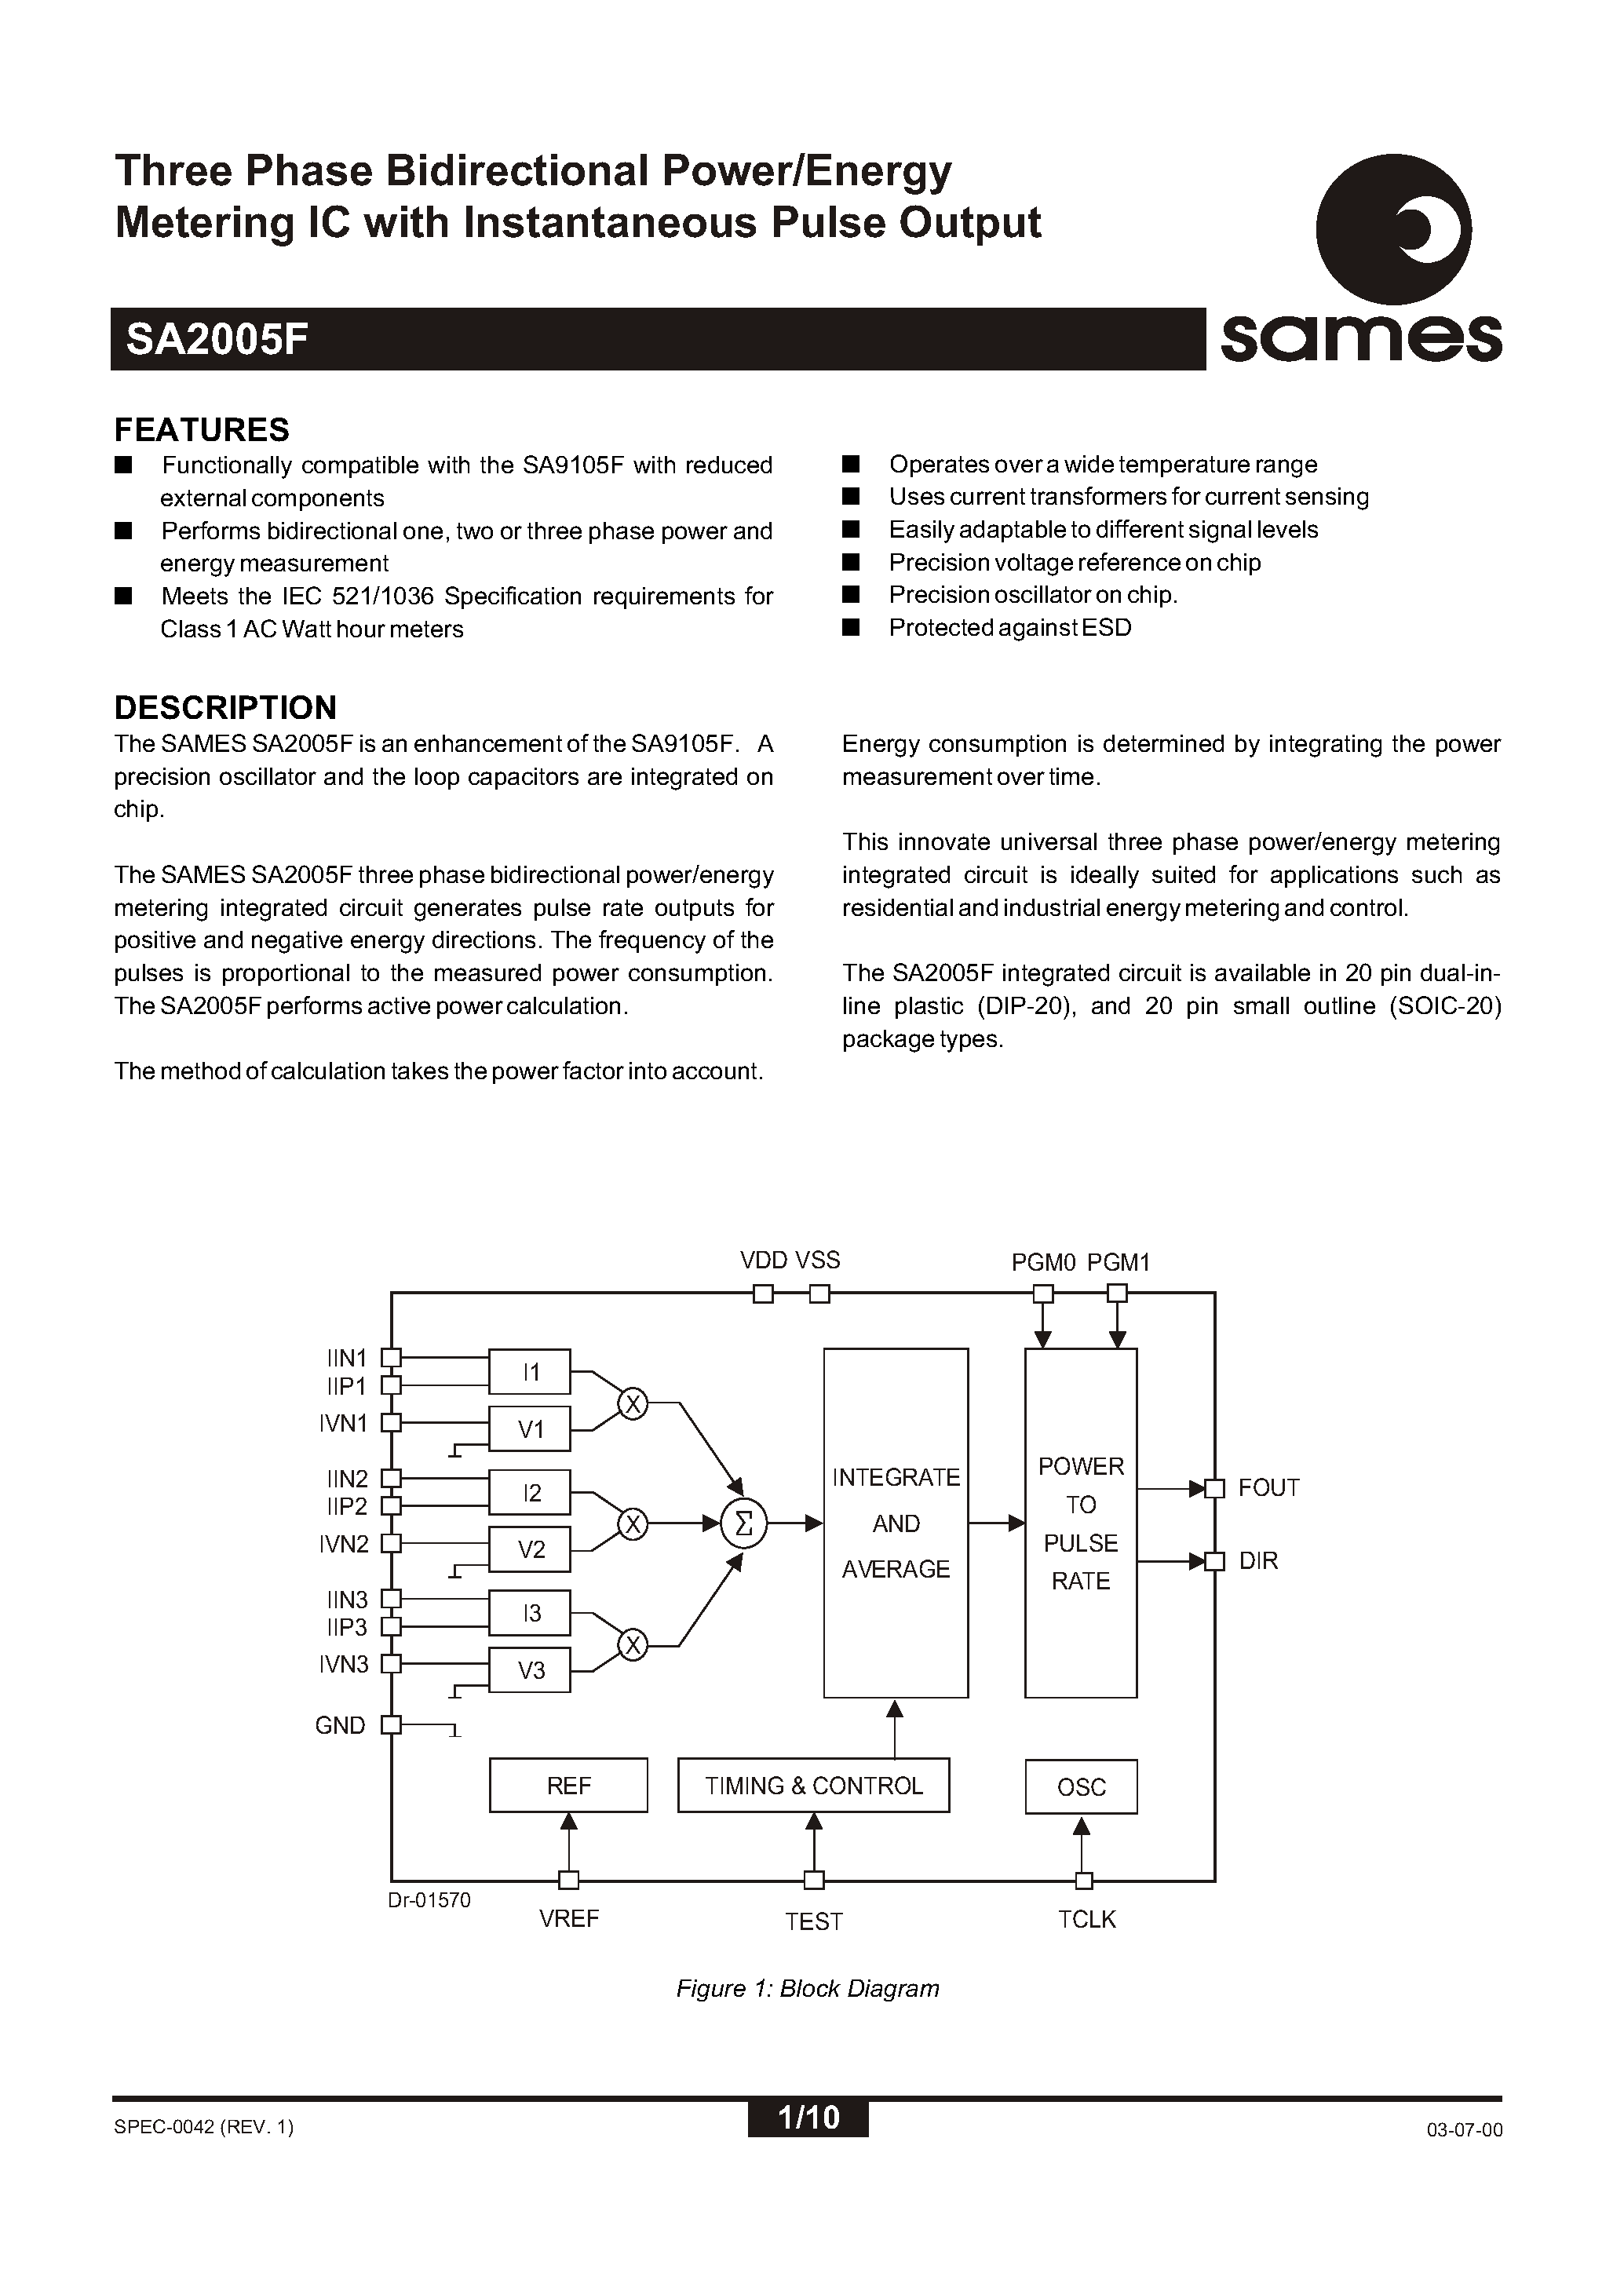 Datasheet SA2005FSA - Three Phase Bidirectional Power/Energy Metering IC with Instantaneous Pulse Output page 1